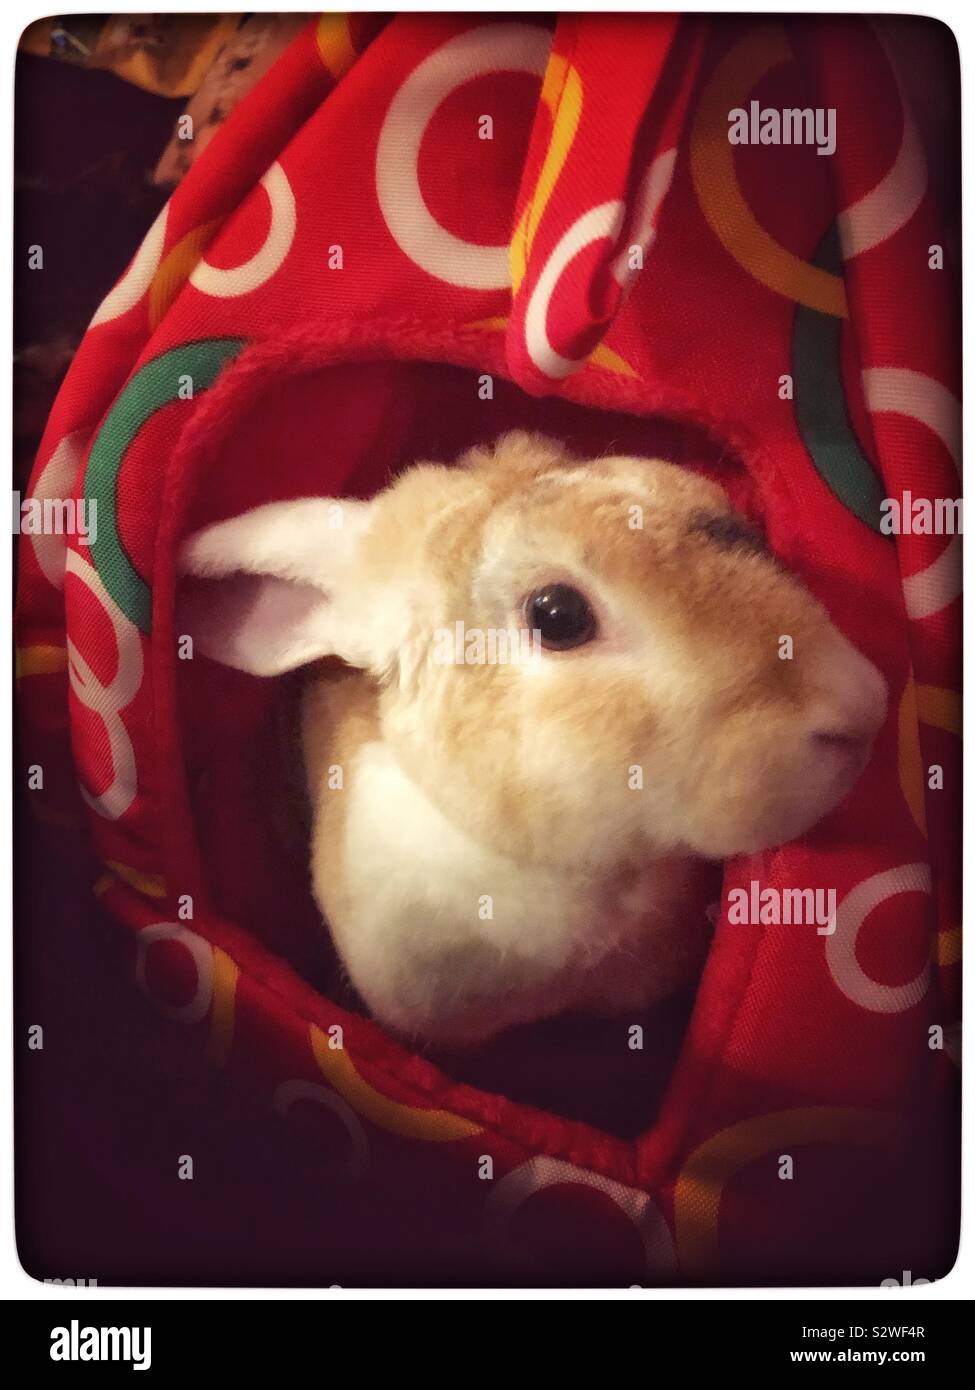 Rabbit peaking out of his bed Stock Photo